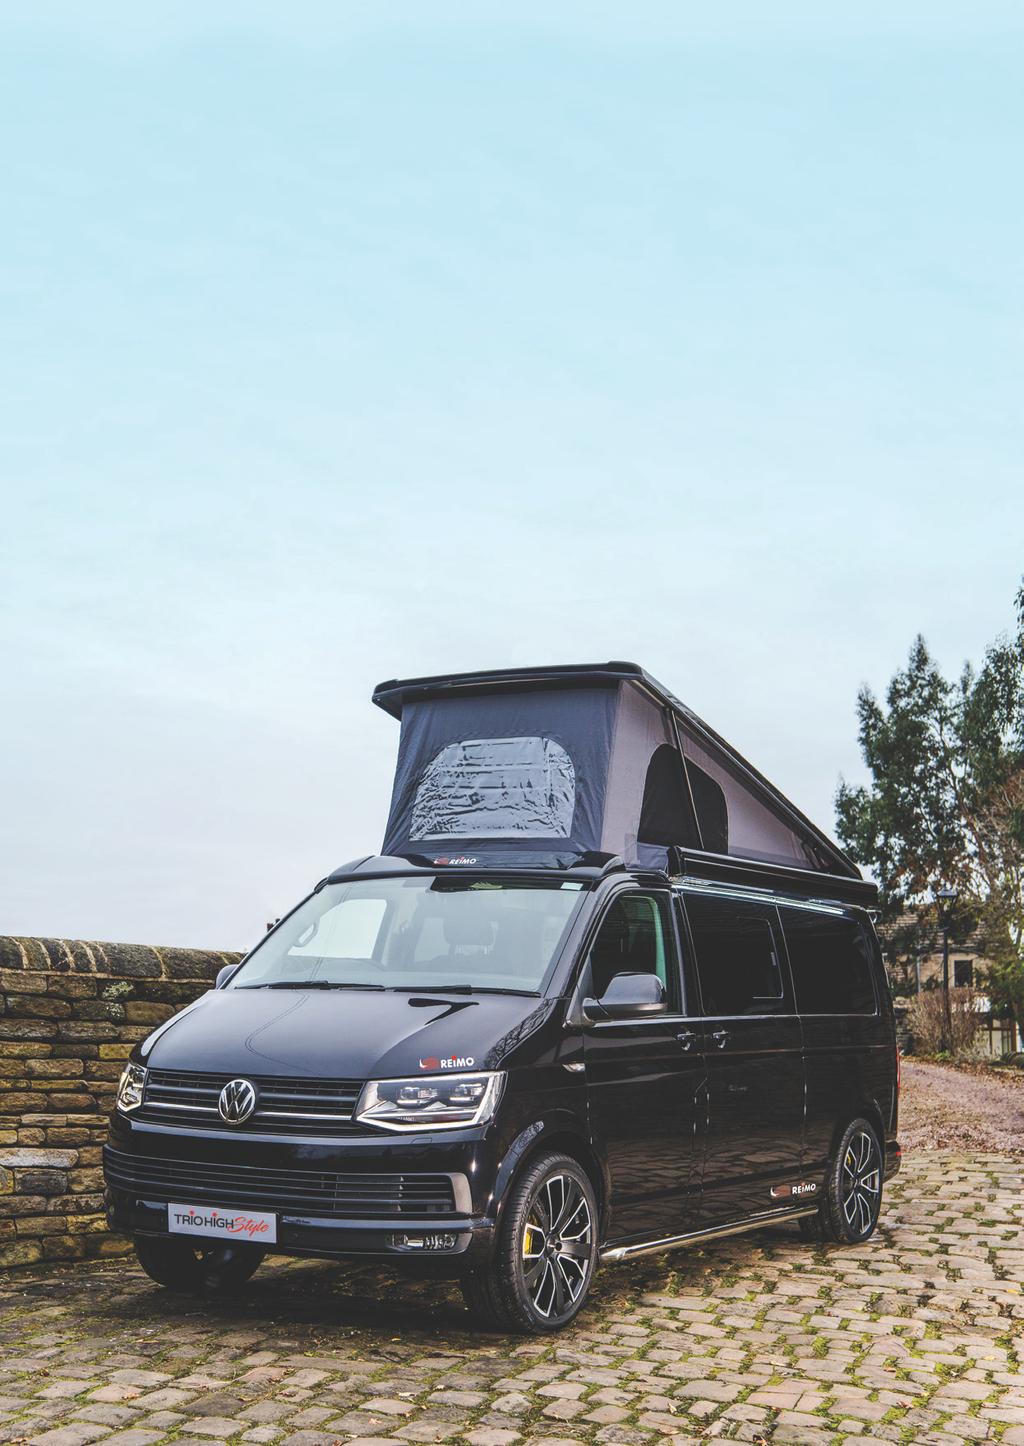 These famous Reimo Campervans are built in the UK Van by our Reimo trained & experienced engineers in our dedicated Reimo workshop and carry the all important Reimo badge AND back up.